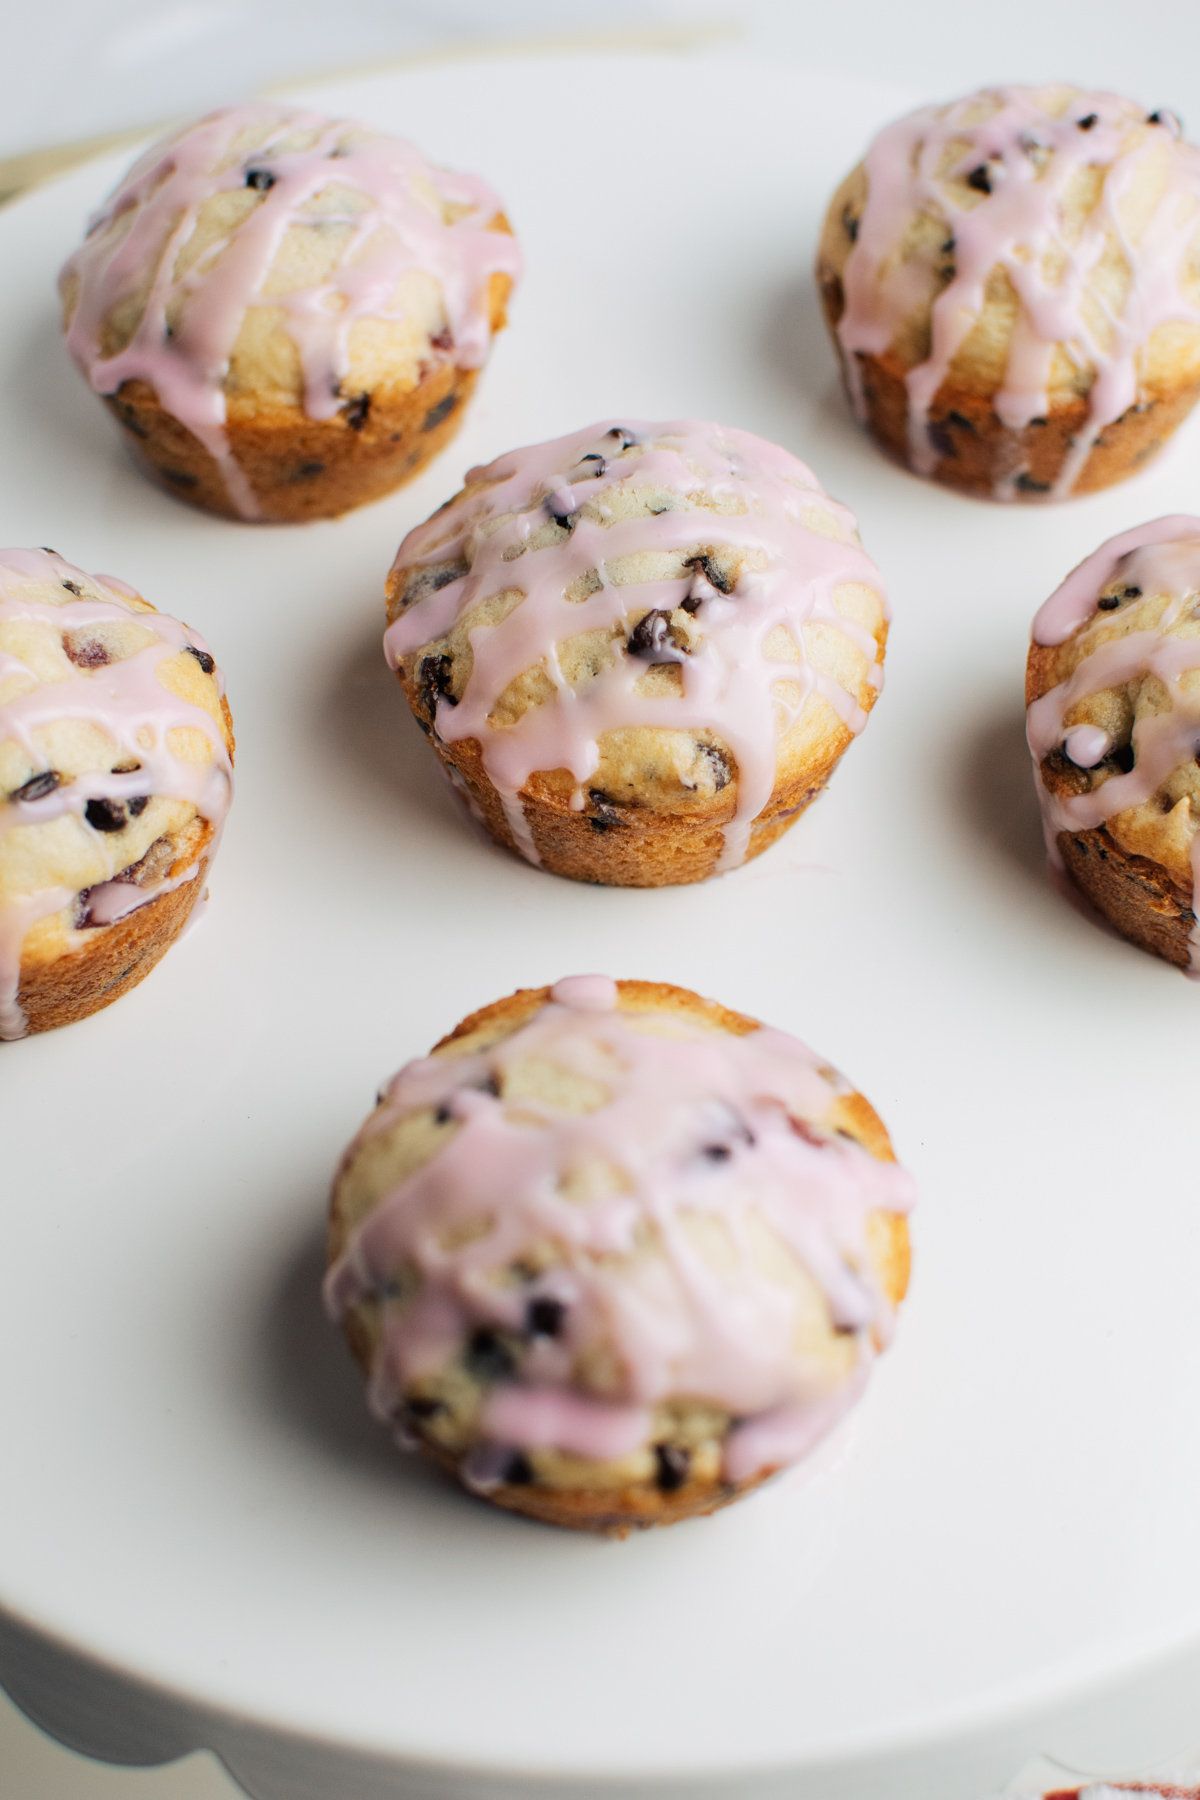 Several cherry chocolate chip muffins with pink glaze on white serving platter.